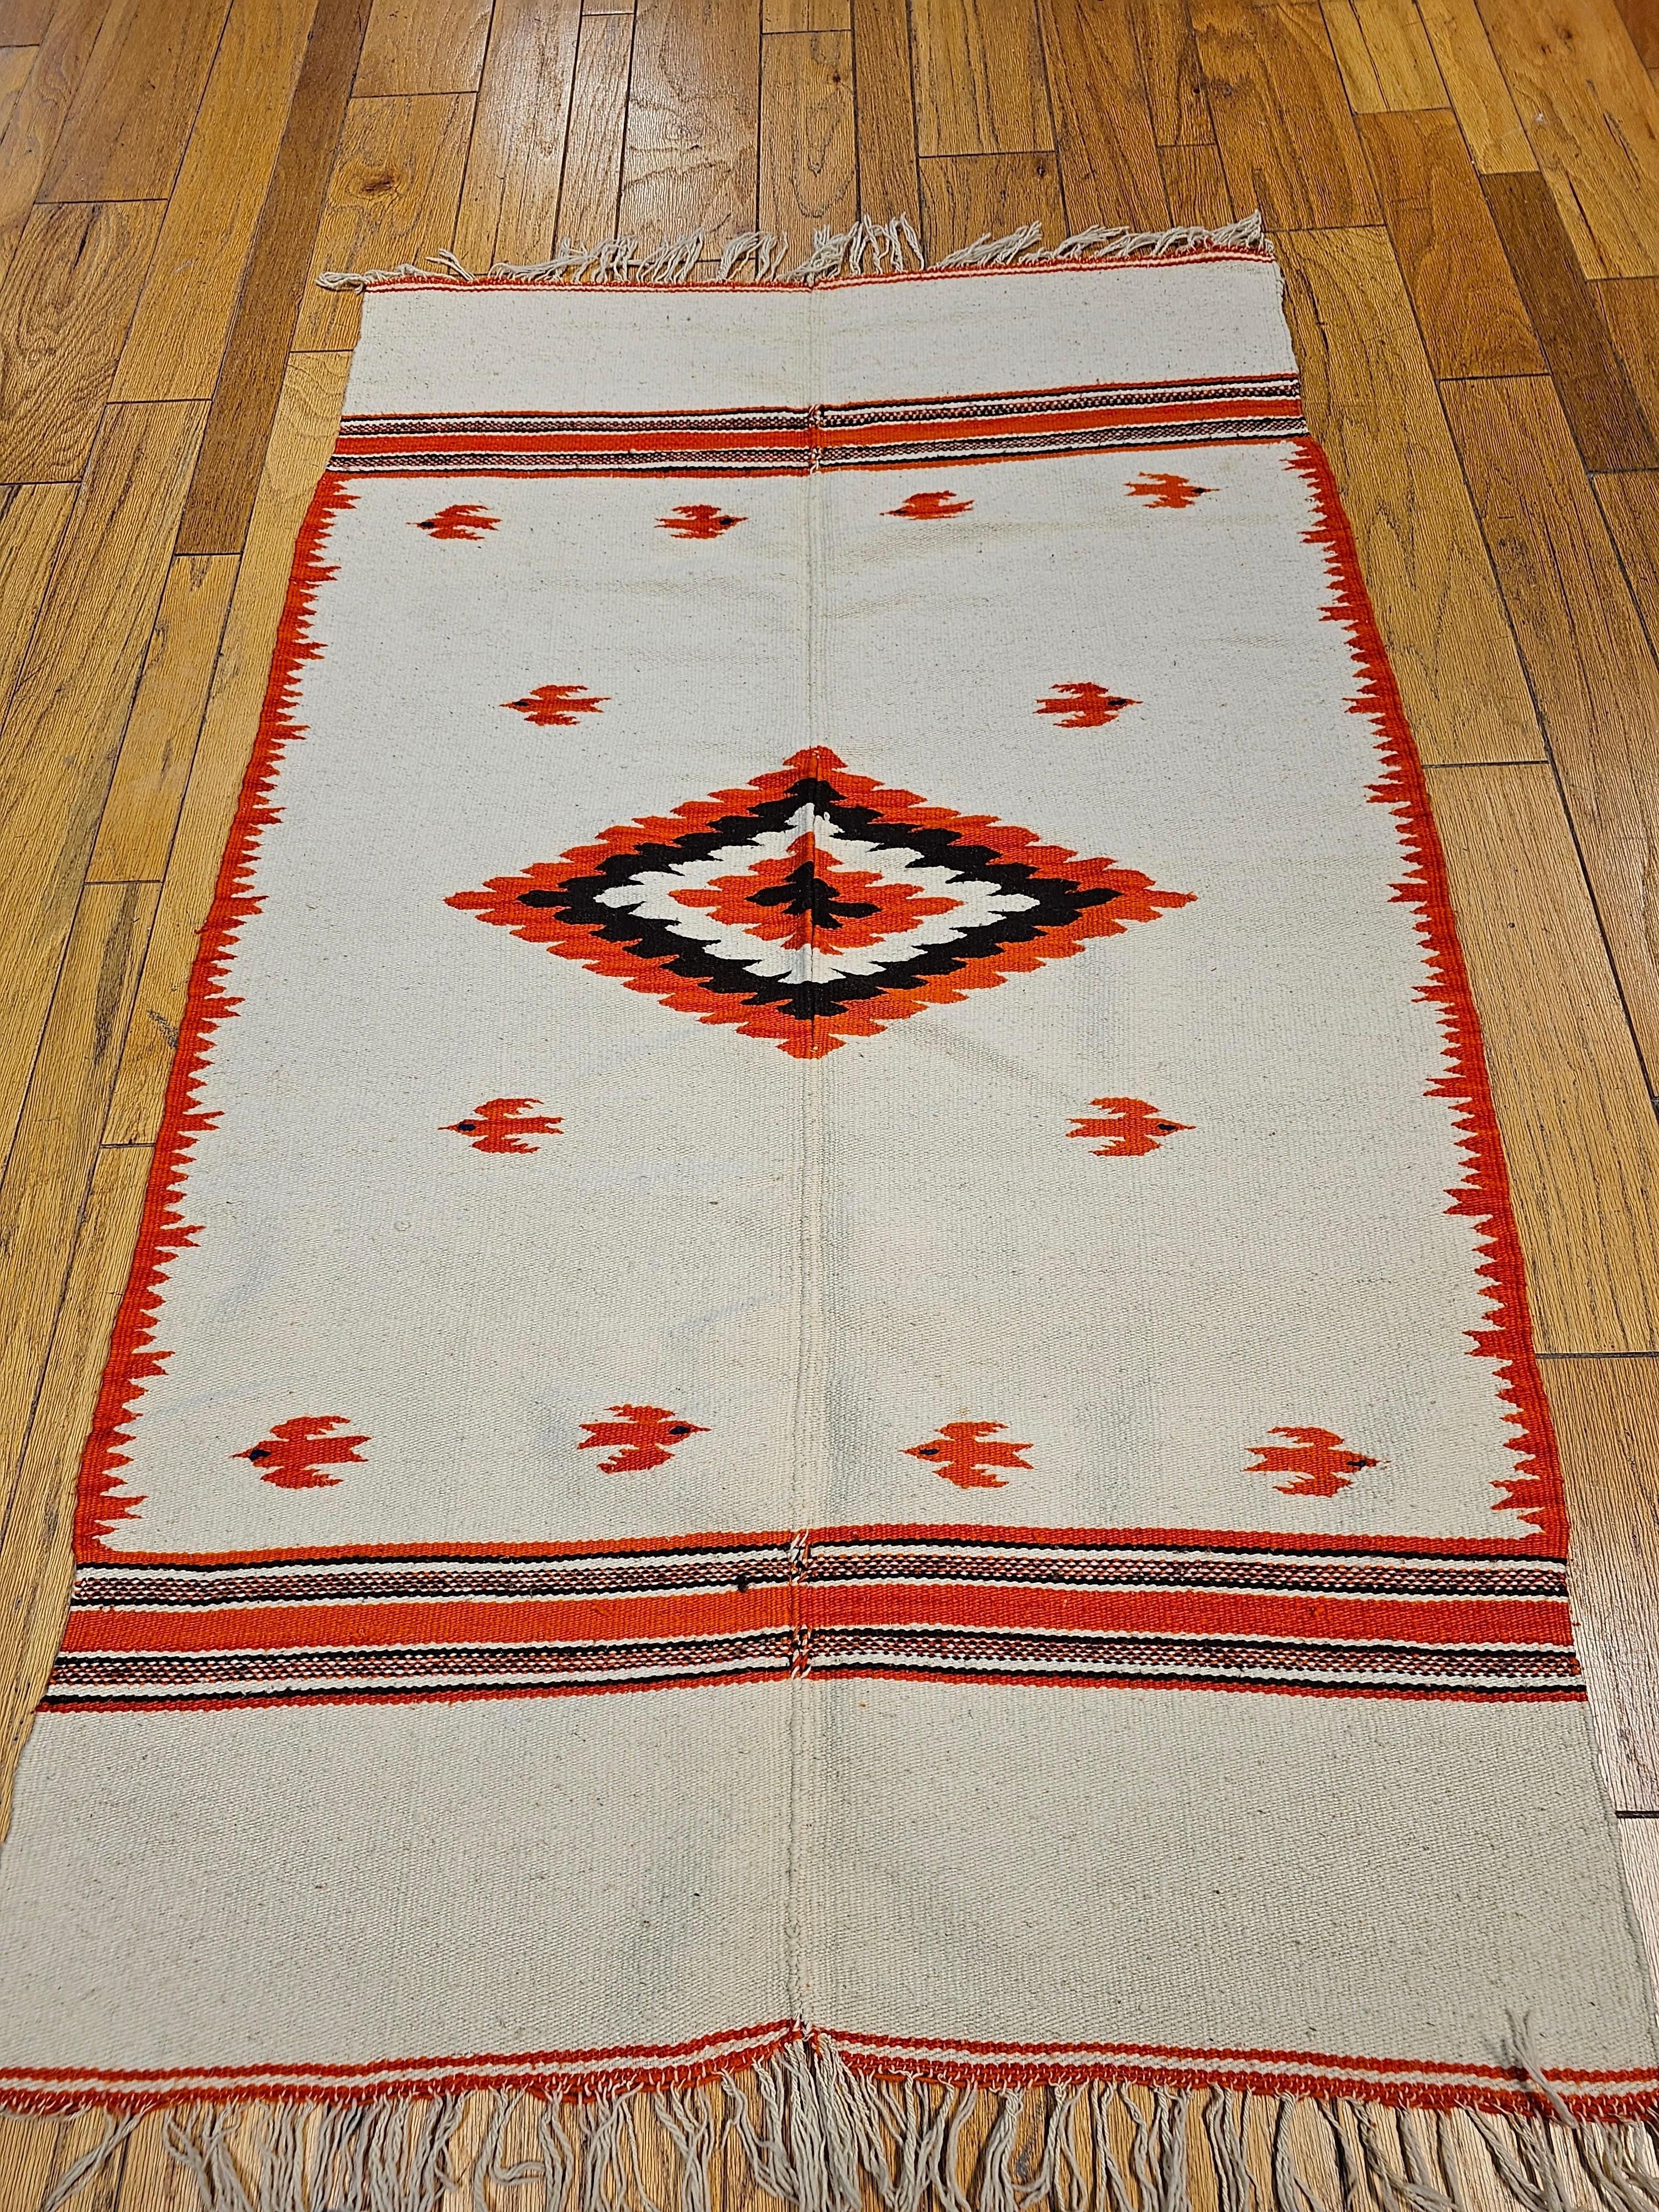 Hand-Woven Vintage Mexican Serape Saltillo Kilim Rug with Mythical Bird Designs For Sale